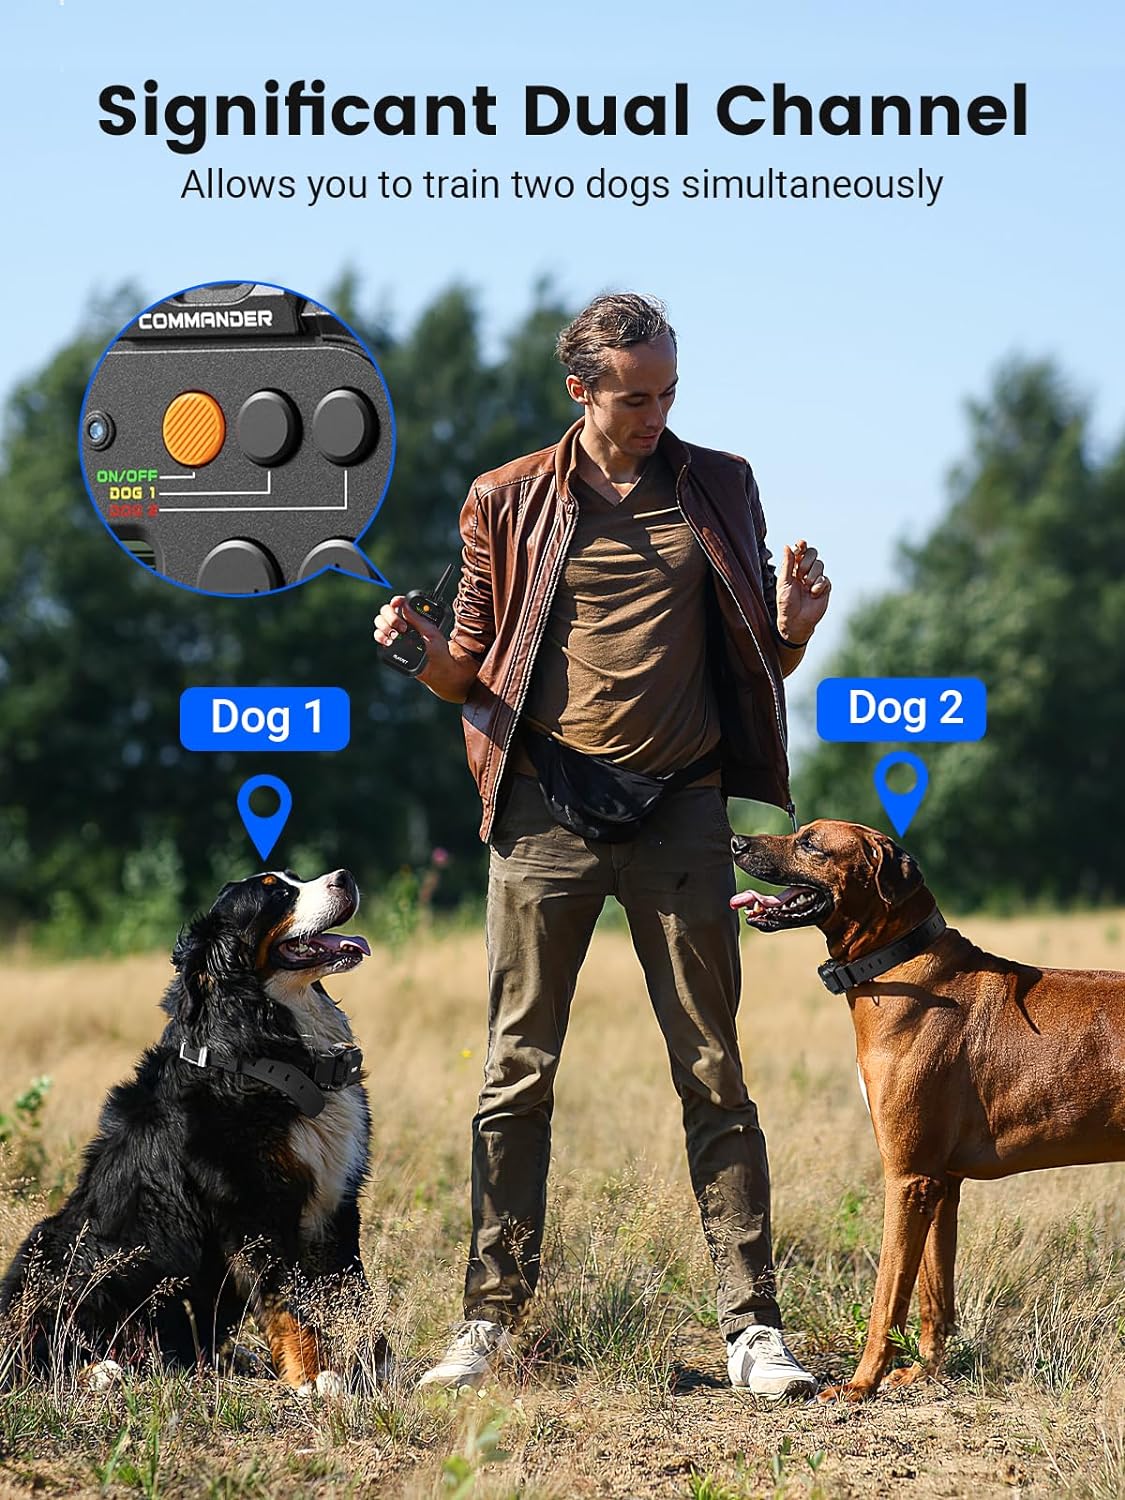 PLAYPET Dog Training Collar, 2950FT Remote Dog Shock Collar for Small Medium Large Dogs, IPX7 Waterproof, Rechargeable Electric Shock Collar with 3 Training M